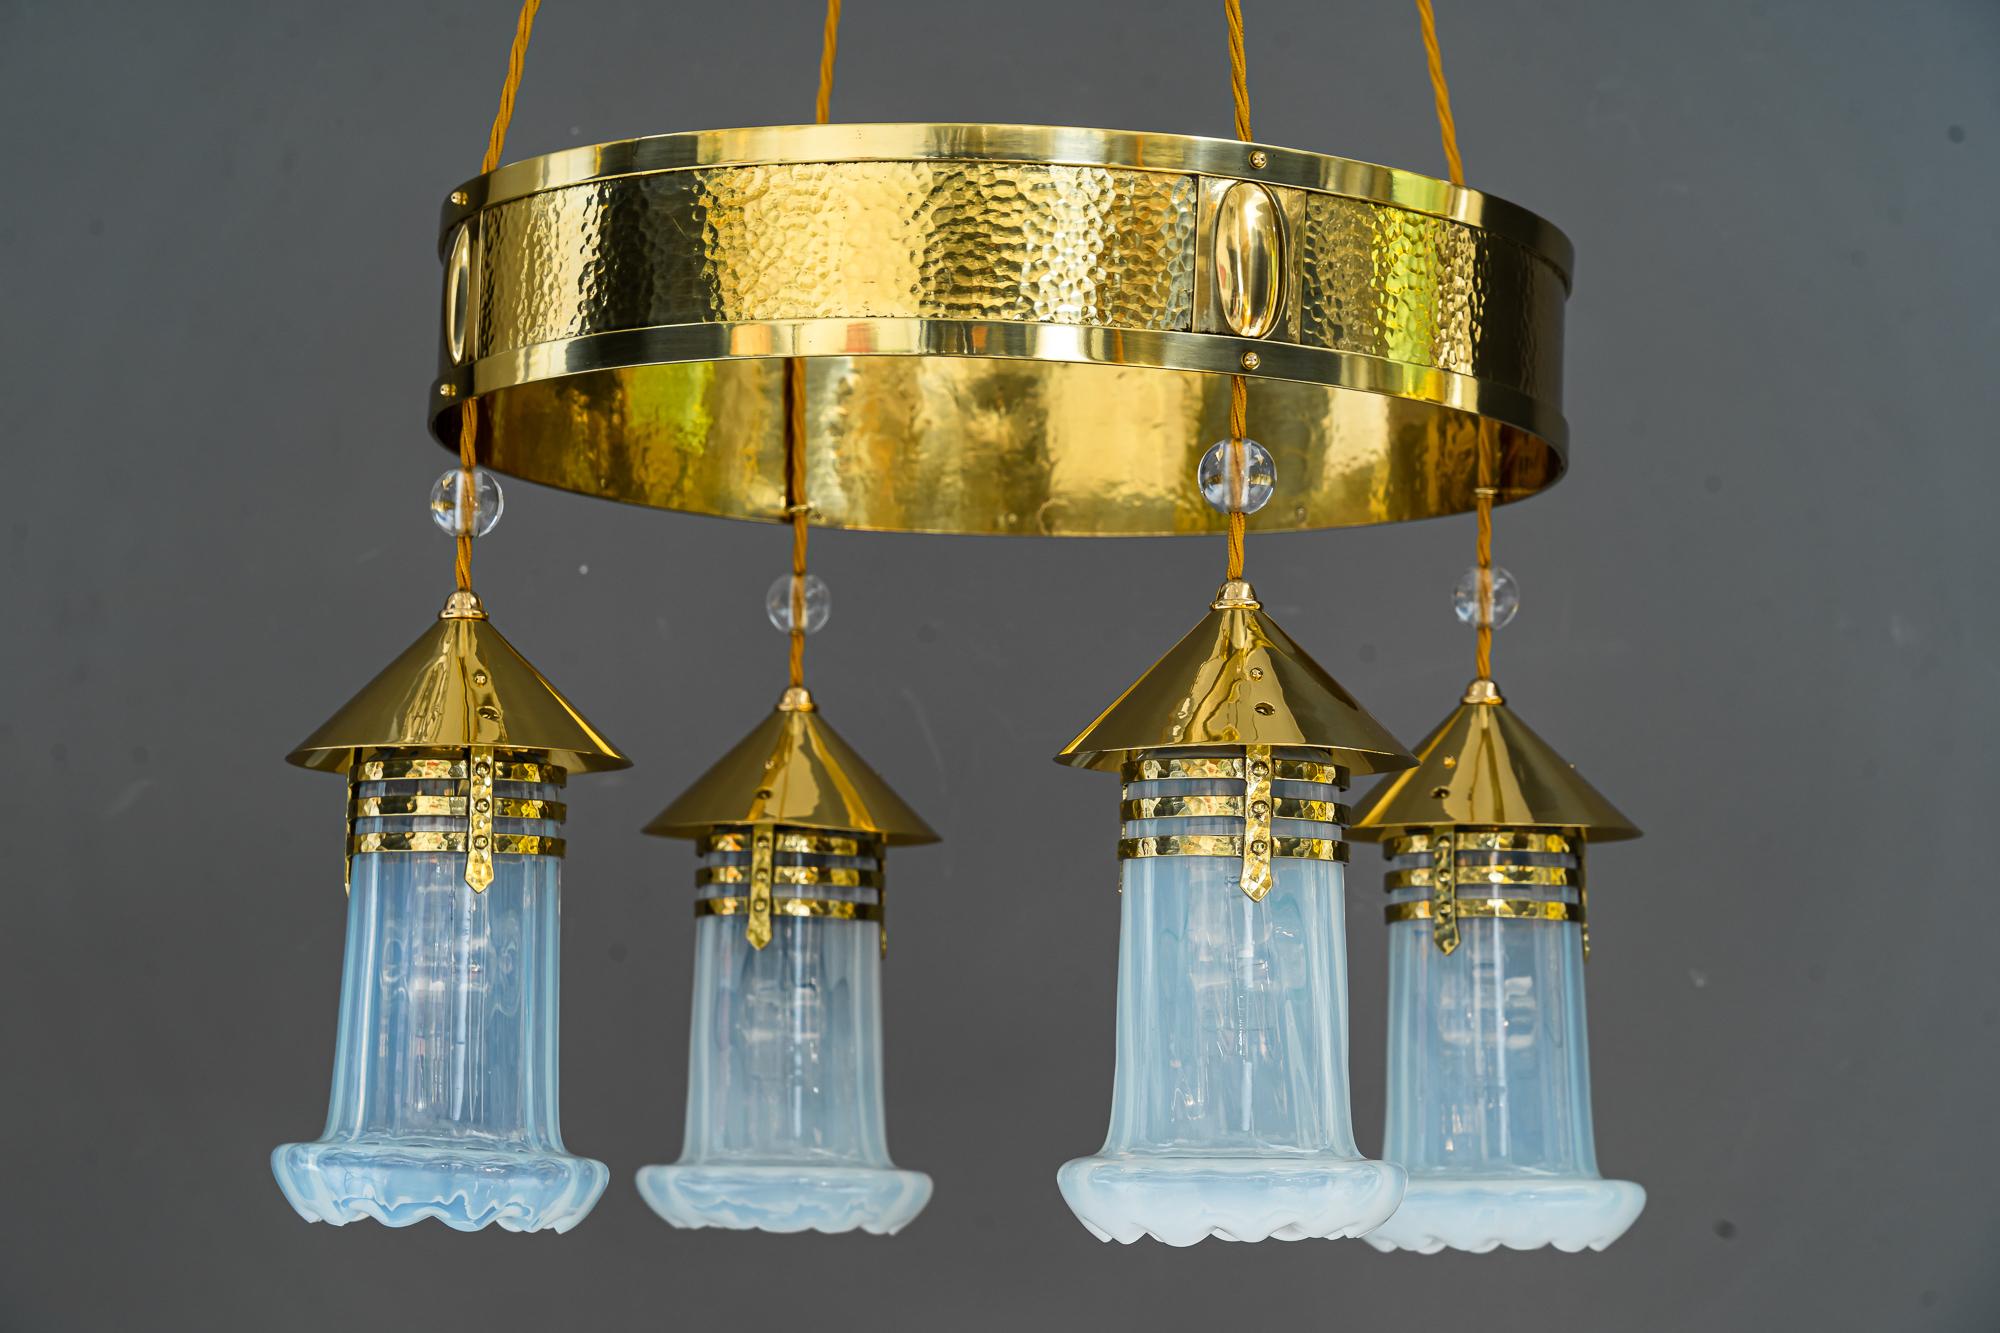 Hammered Art Deco Chandelier with opaline glass shades, Vienna, around 1920.
Polished and stove enameled.
Original old opaline glass shades.
 